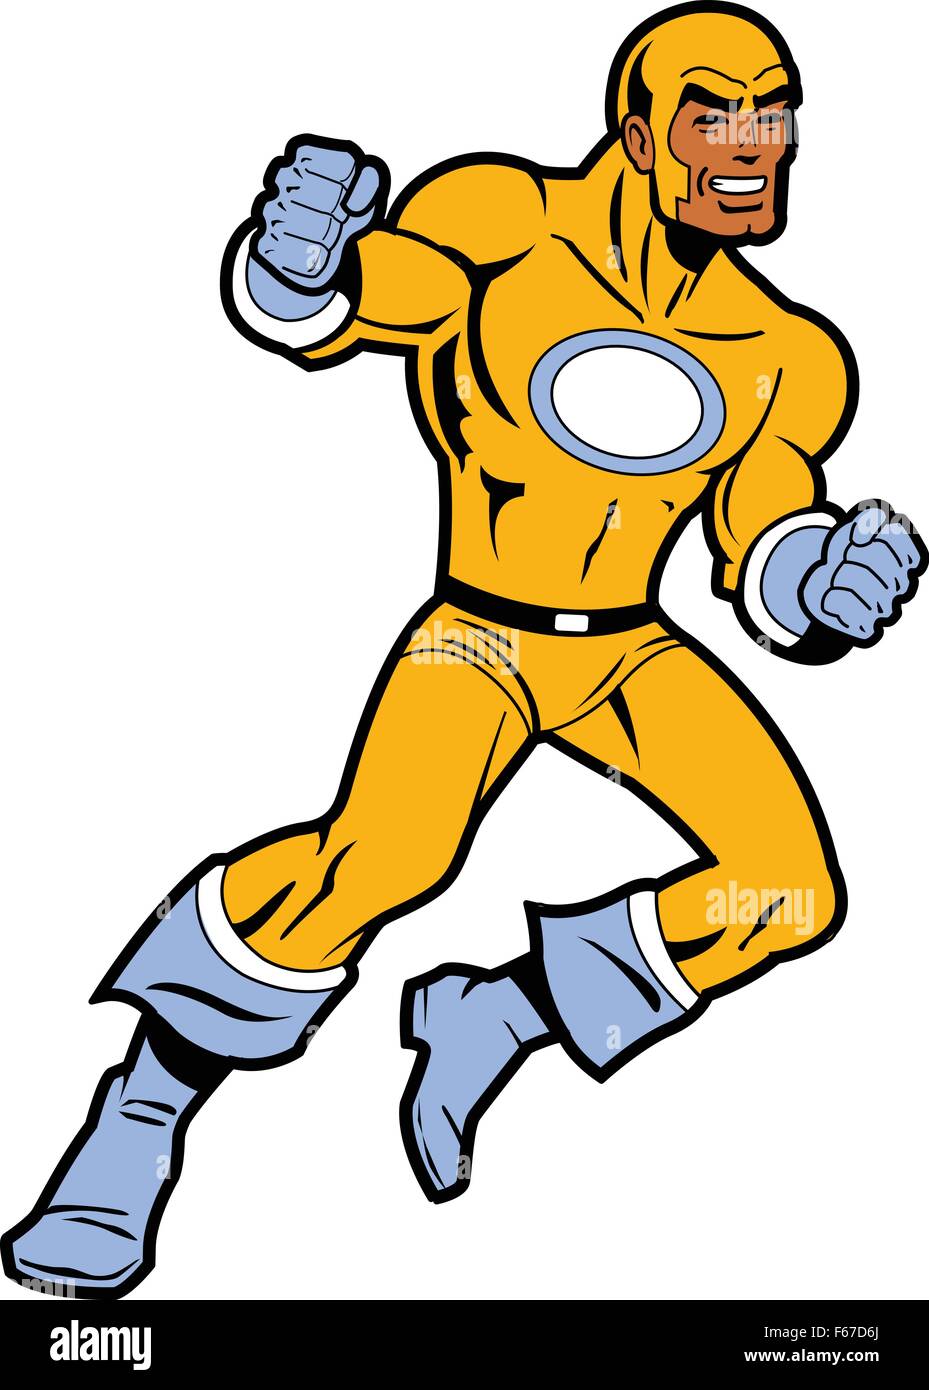 Black Superhero With Clenched Fists Fighting and Throwing a Punch Stock Vector